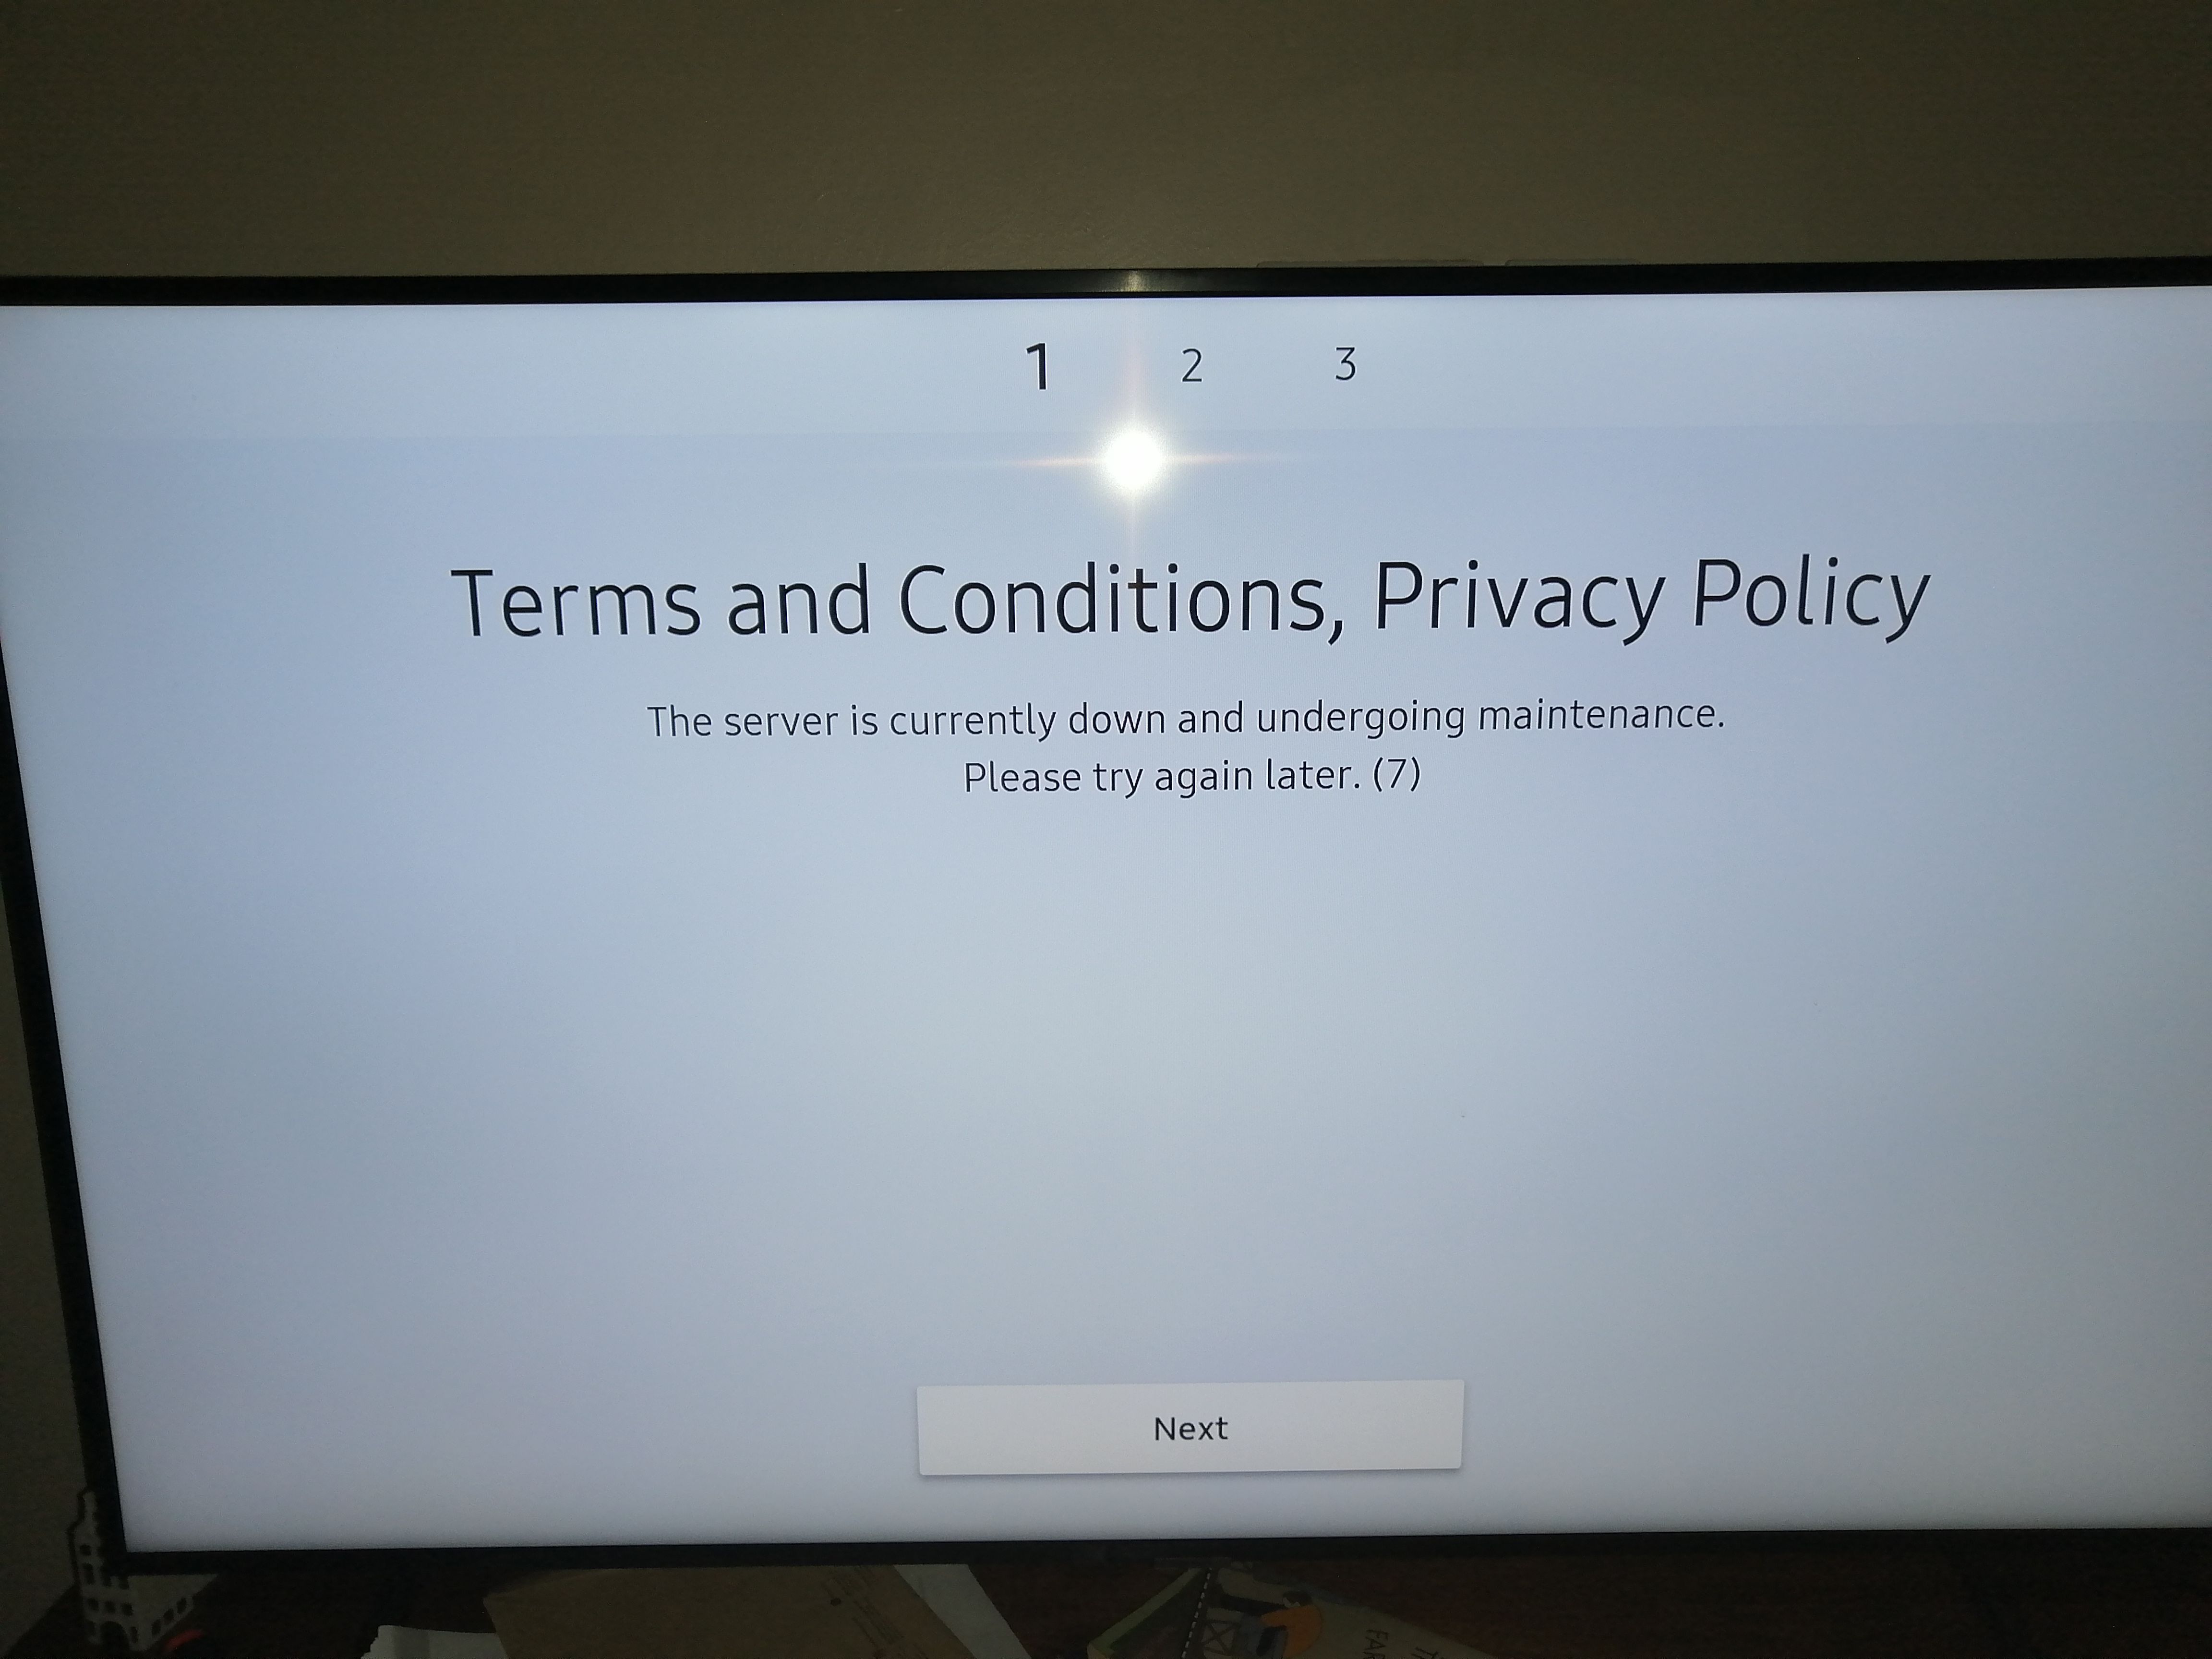 Unable to sign Smarthub terms and conditions - Samsung Community